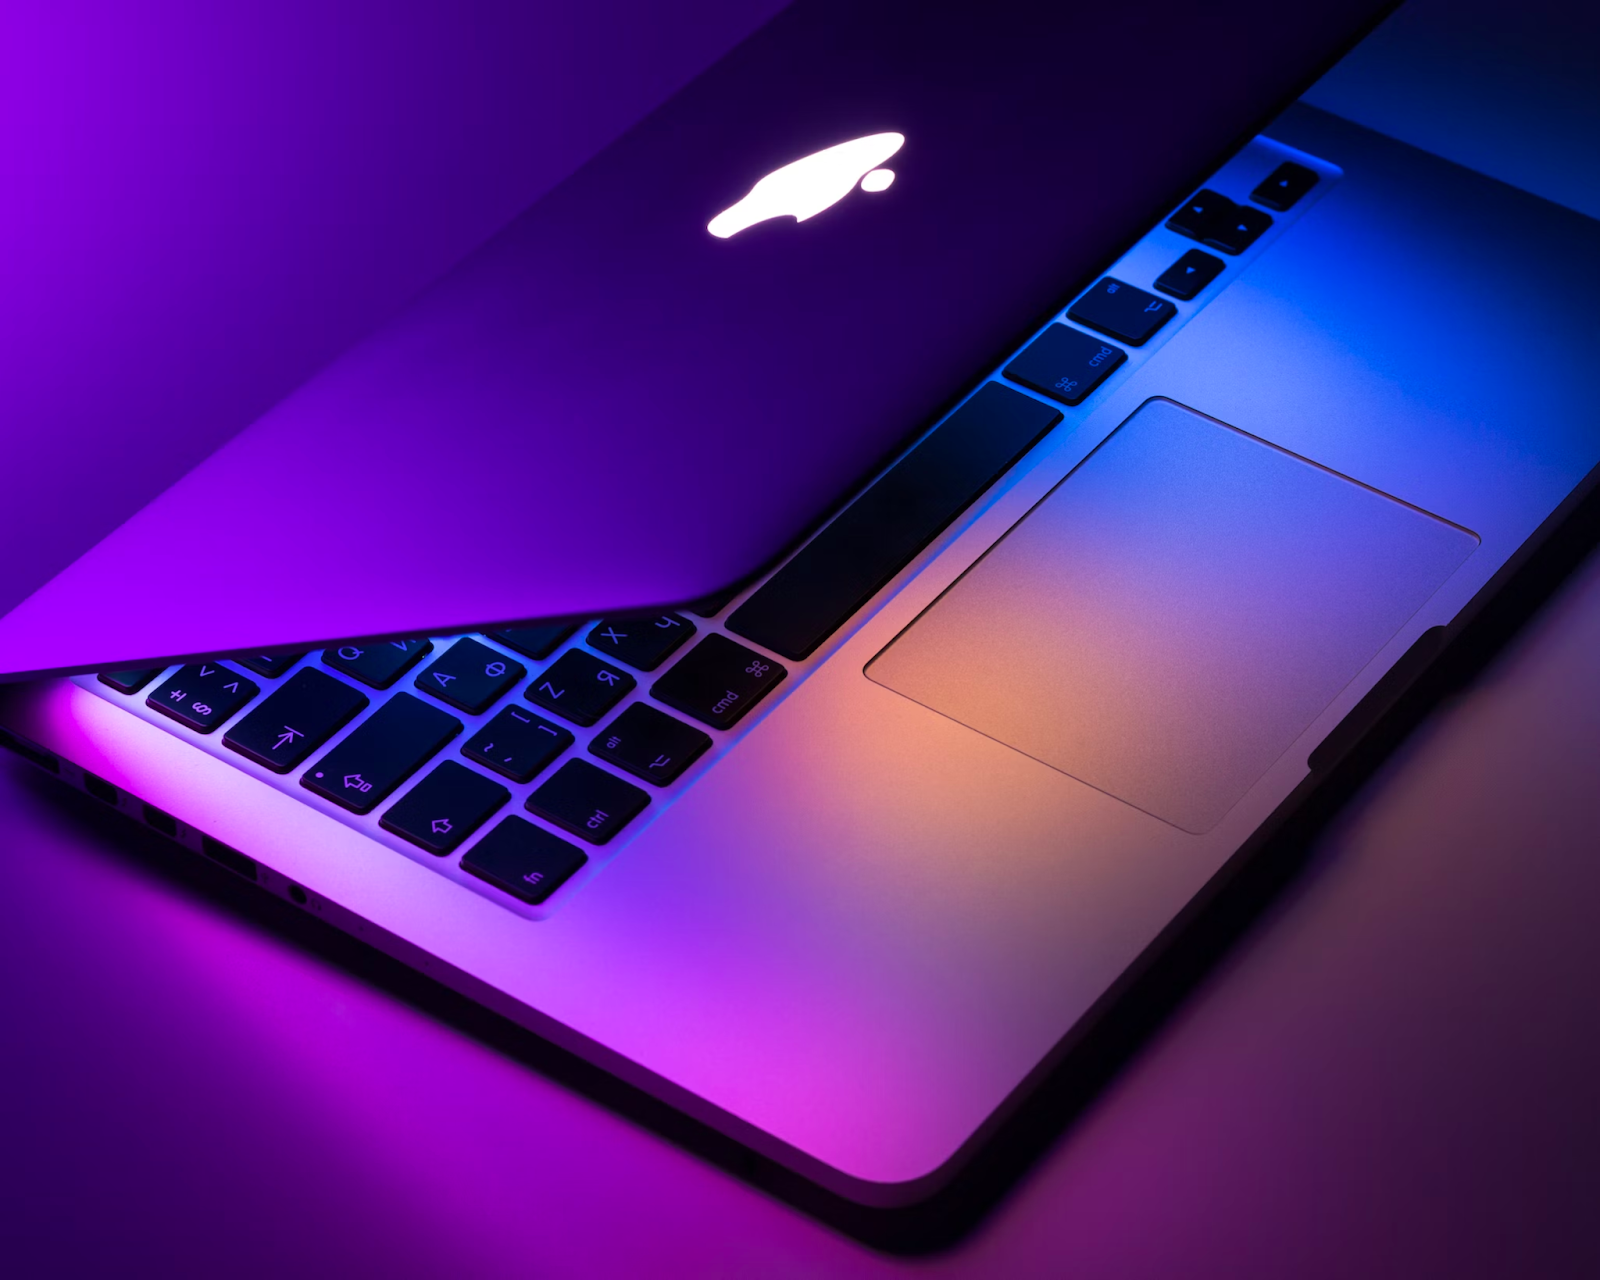 Troubleshooting Common Mac Issues: From Slow Speed to Unexpected Shutdowns